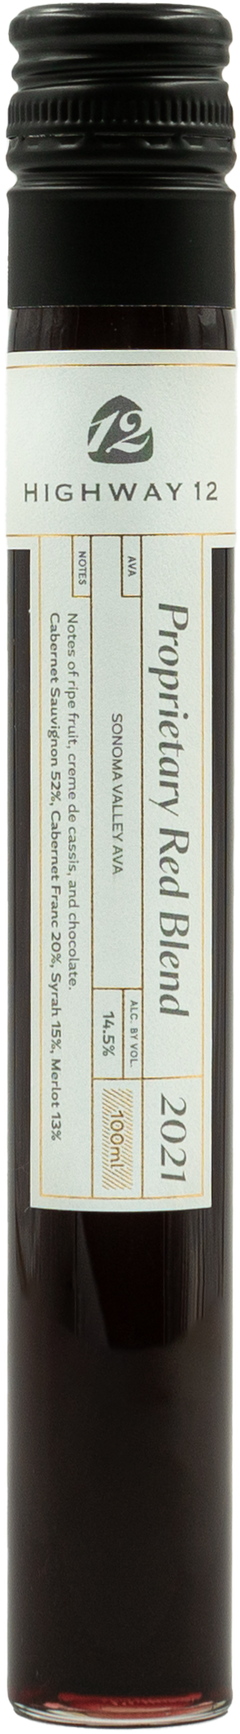 Highway 12 Winery Proprietary Red Blend (2021)